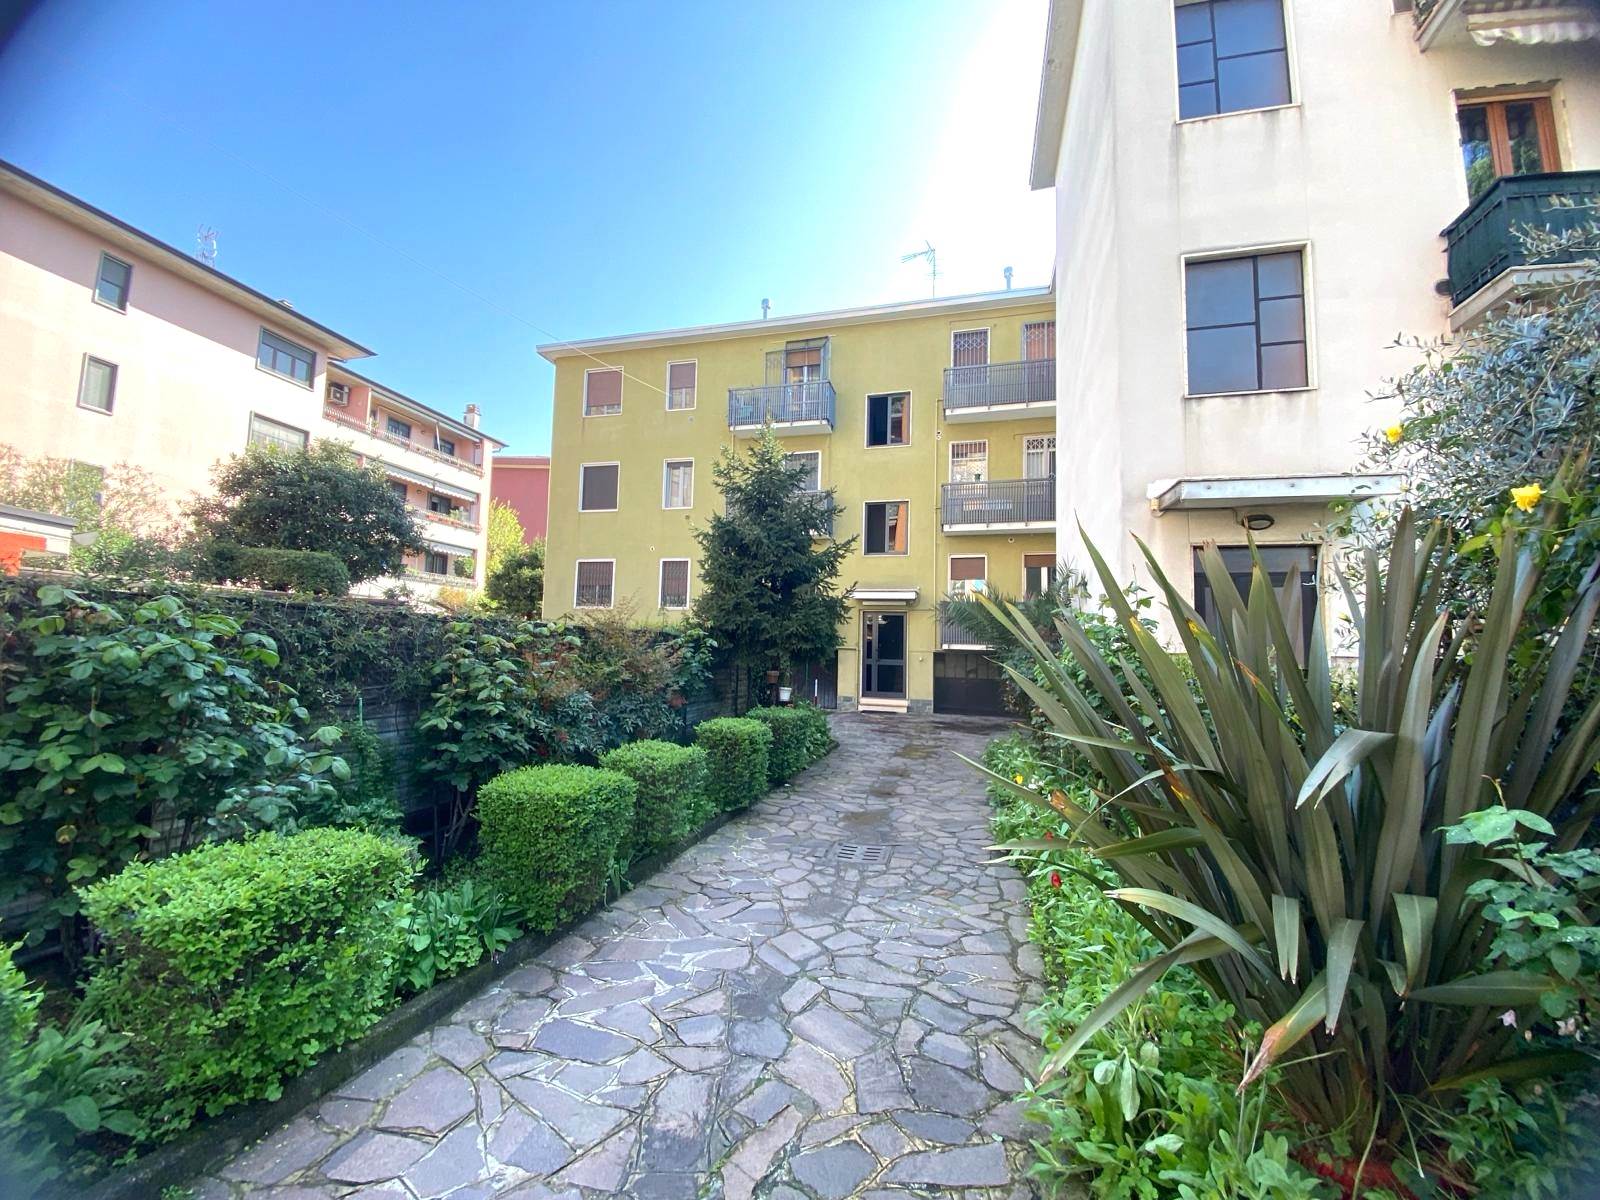 SEGGIANO, PIOLTELLO, Apartment for sale of 83 Sq. mt., Excellent Condition, Heating Individual heating system, Energetic class: G, Epi: 300 kwh/m2 year, placed at 2° on 2, composed by: 3 Rooms, 